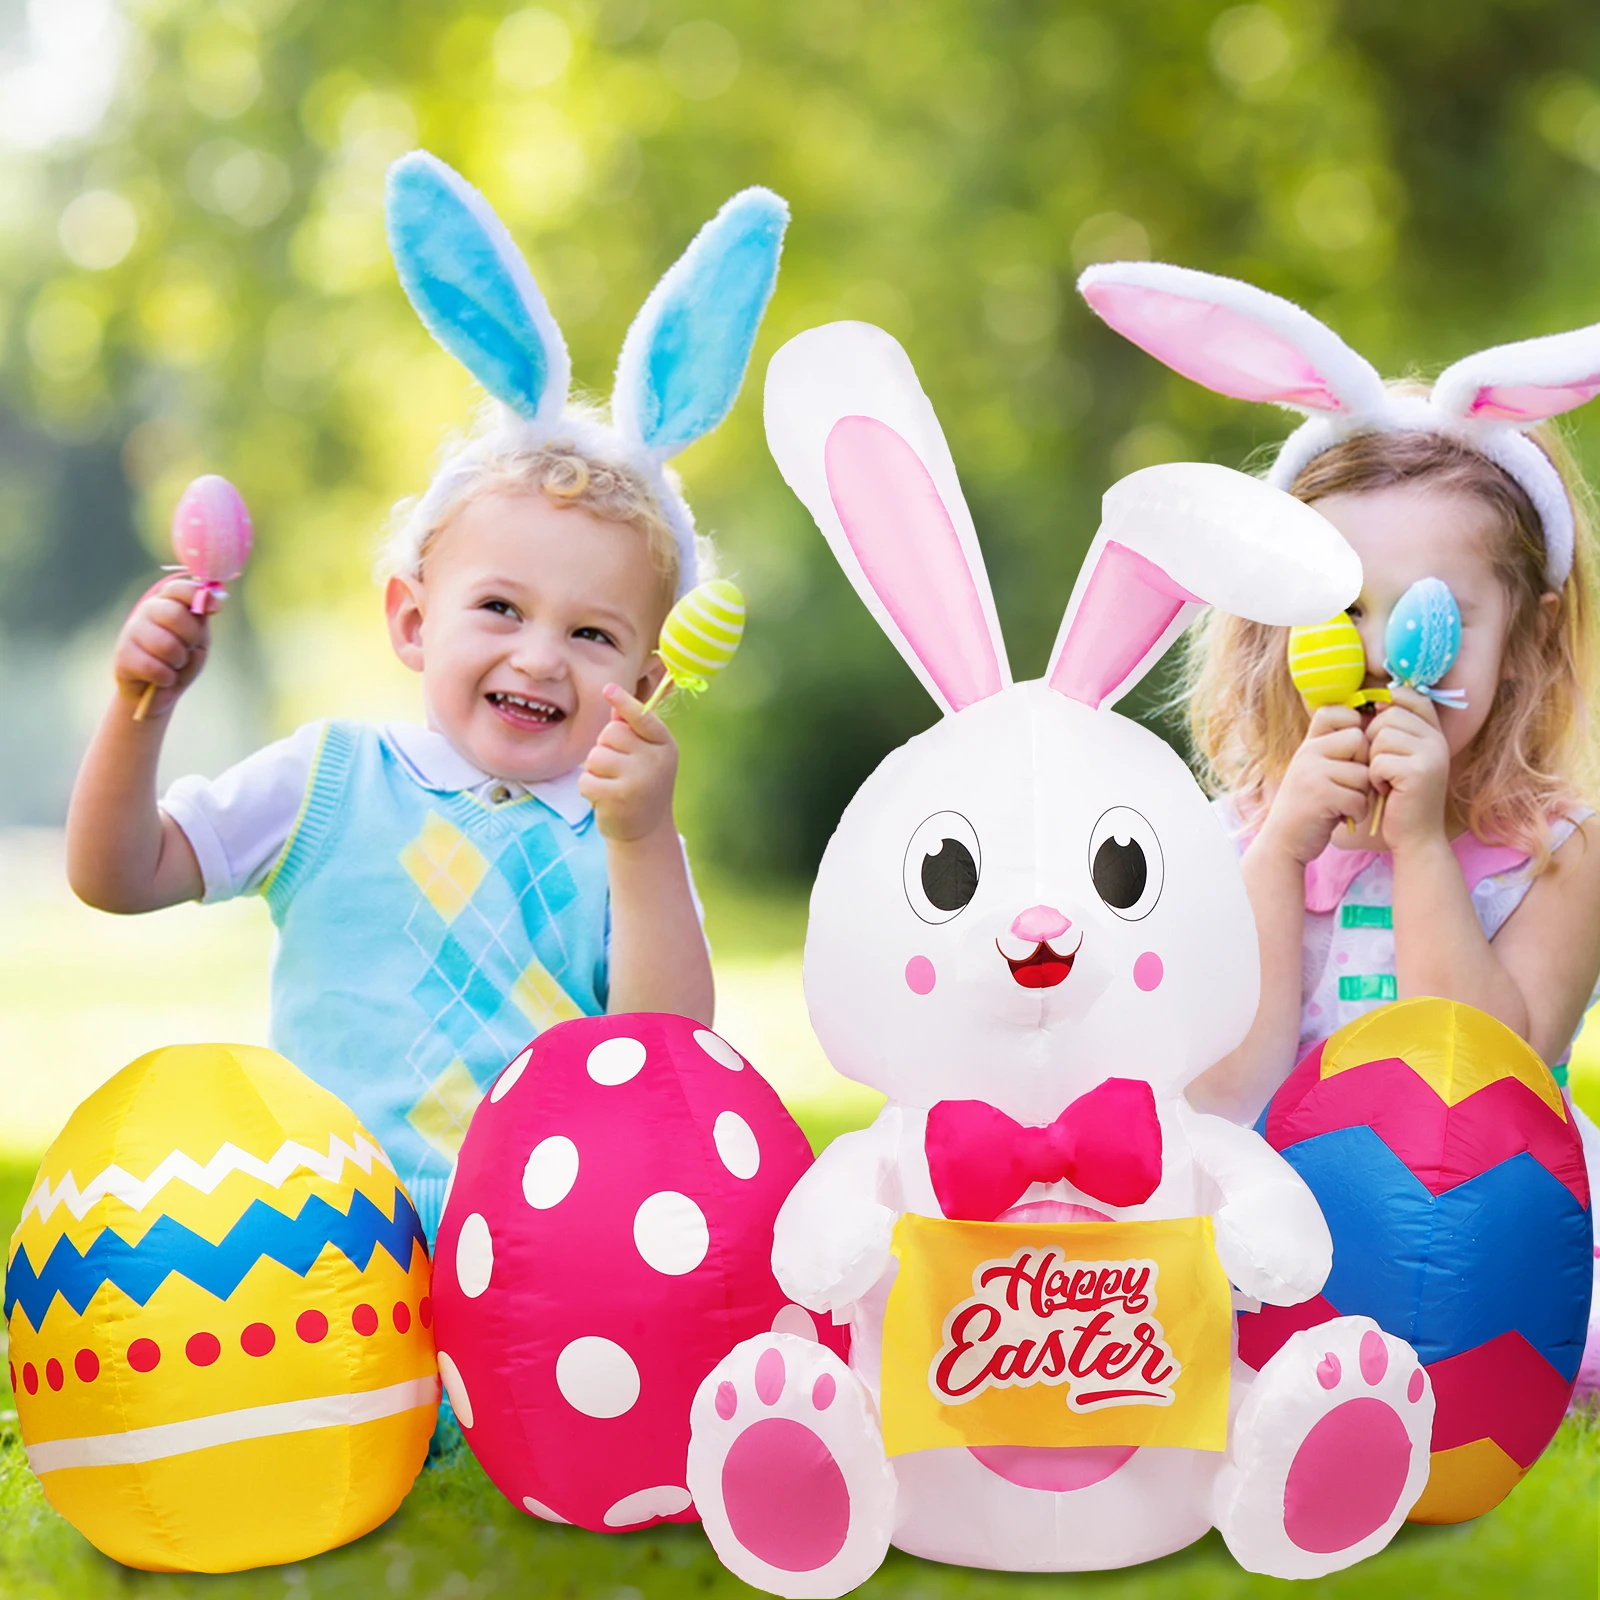 OurWarm 6FT Happy Easter Bunny Inflatables with Eggs Built-in LED Lights  Decoration Easter Inflatable Indoor Outdoor Decorations _ - AliExpress  Mobile